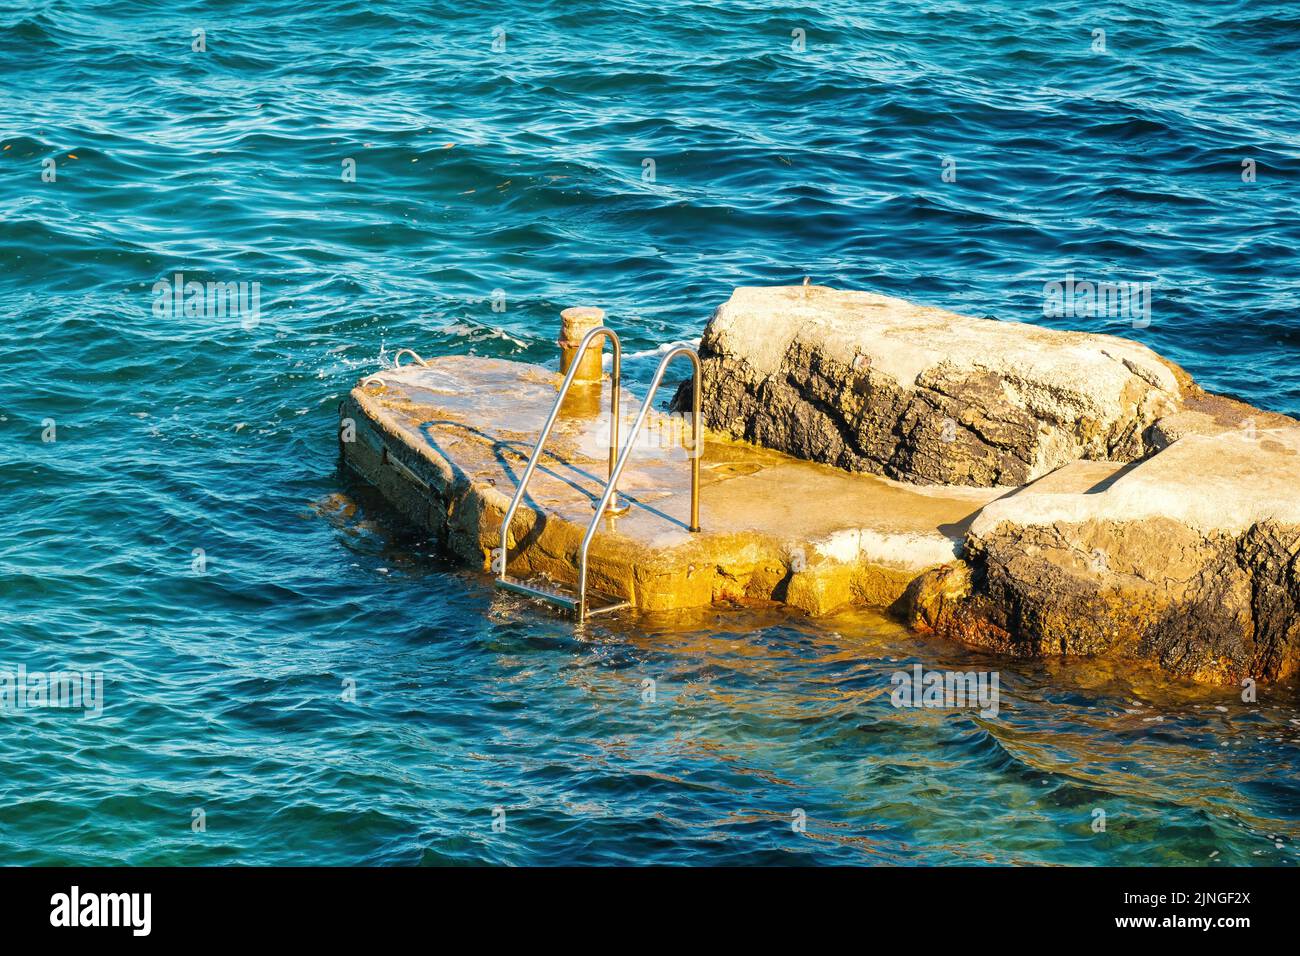 Metal ladder for swimmers descending into sea from small rock at sunlight. Stone pier washed by waves among deep turquoise sea at resort Stock Photo